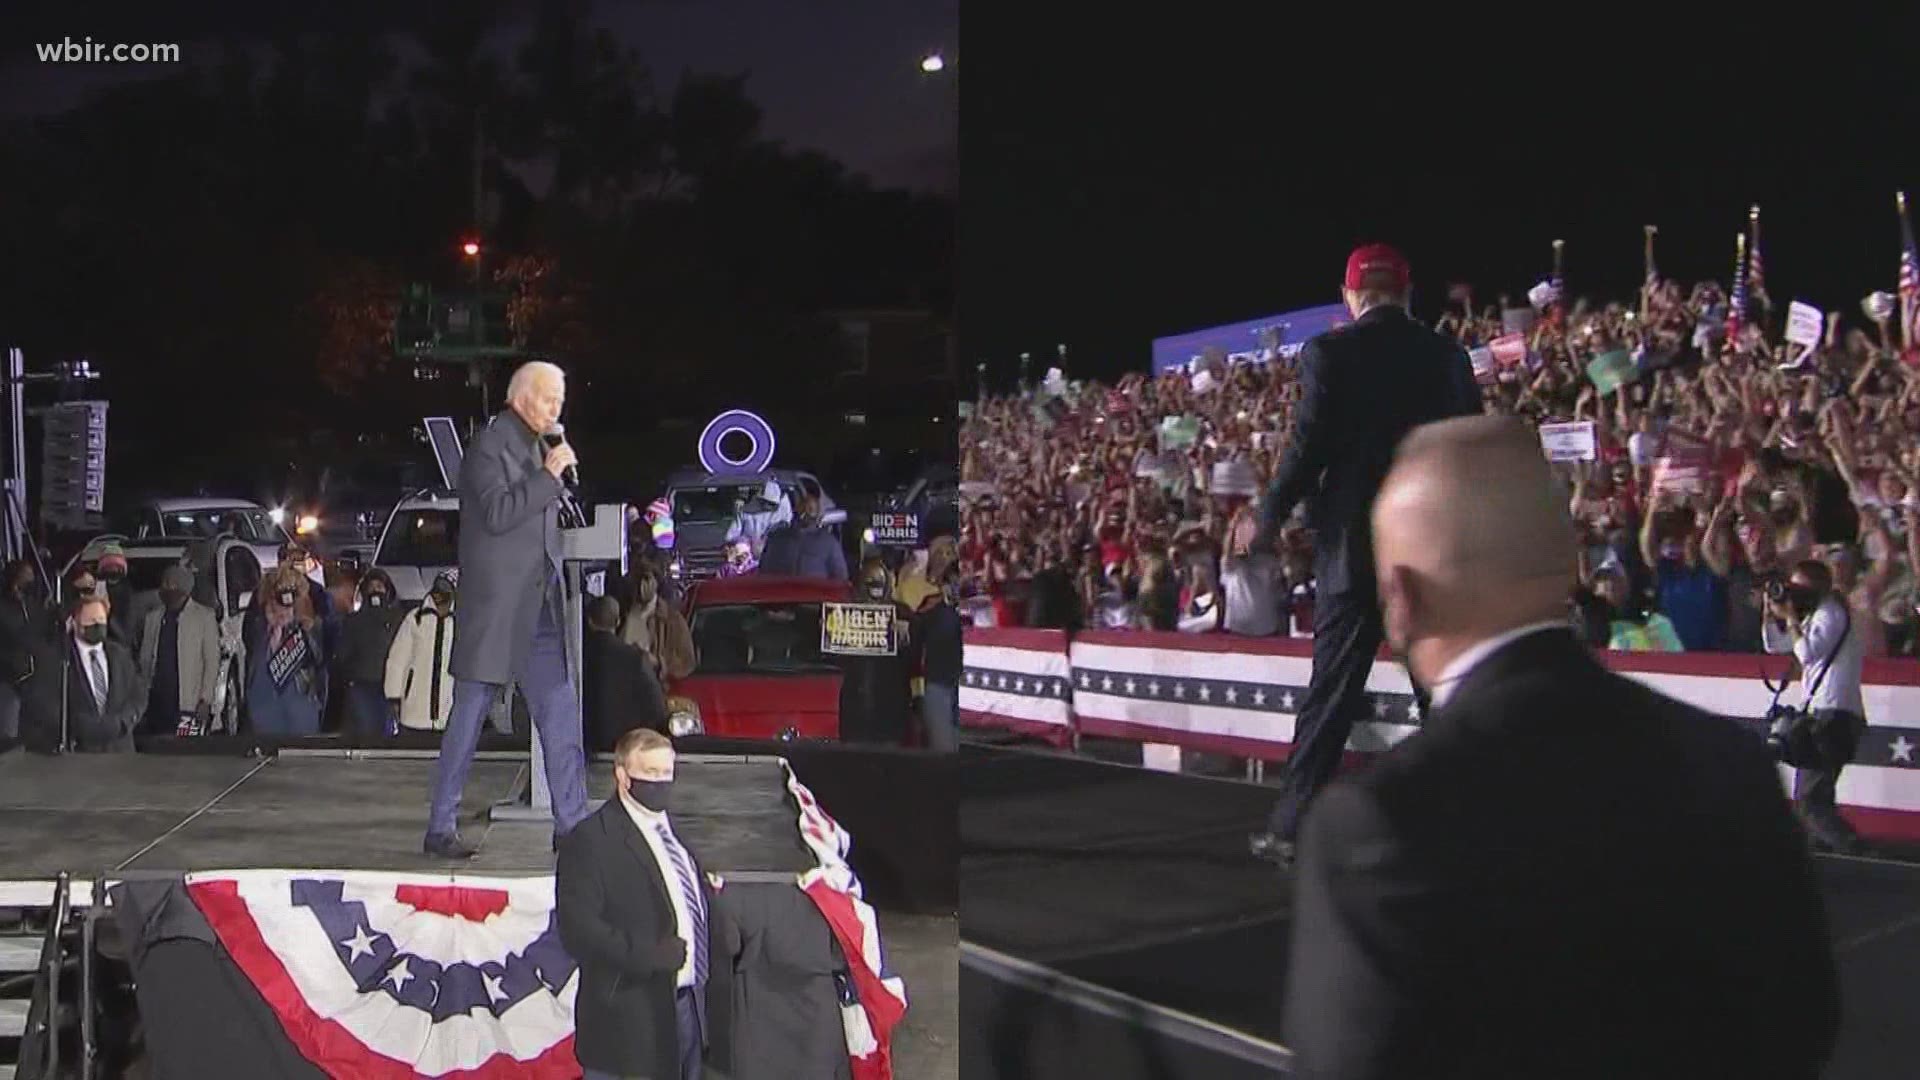 As voters head to the polls, President Donald Trump and former Vice President Joe Biden are making their final pitch to voters.